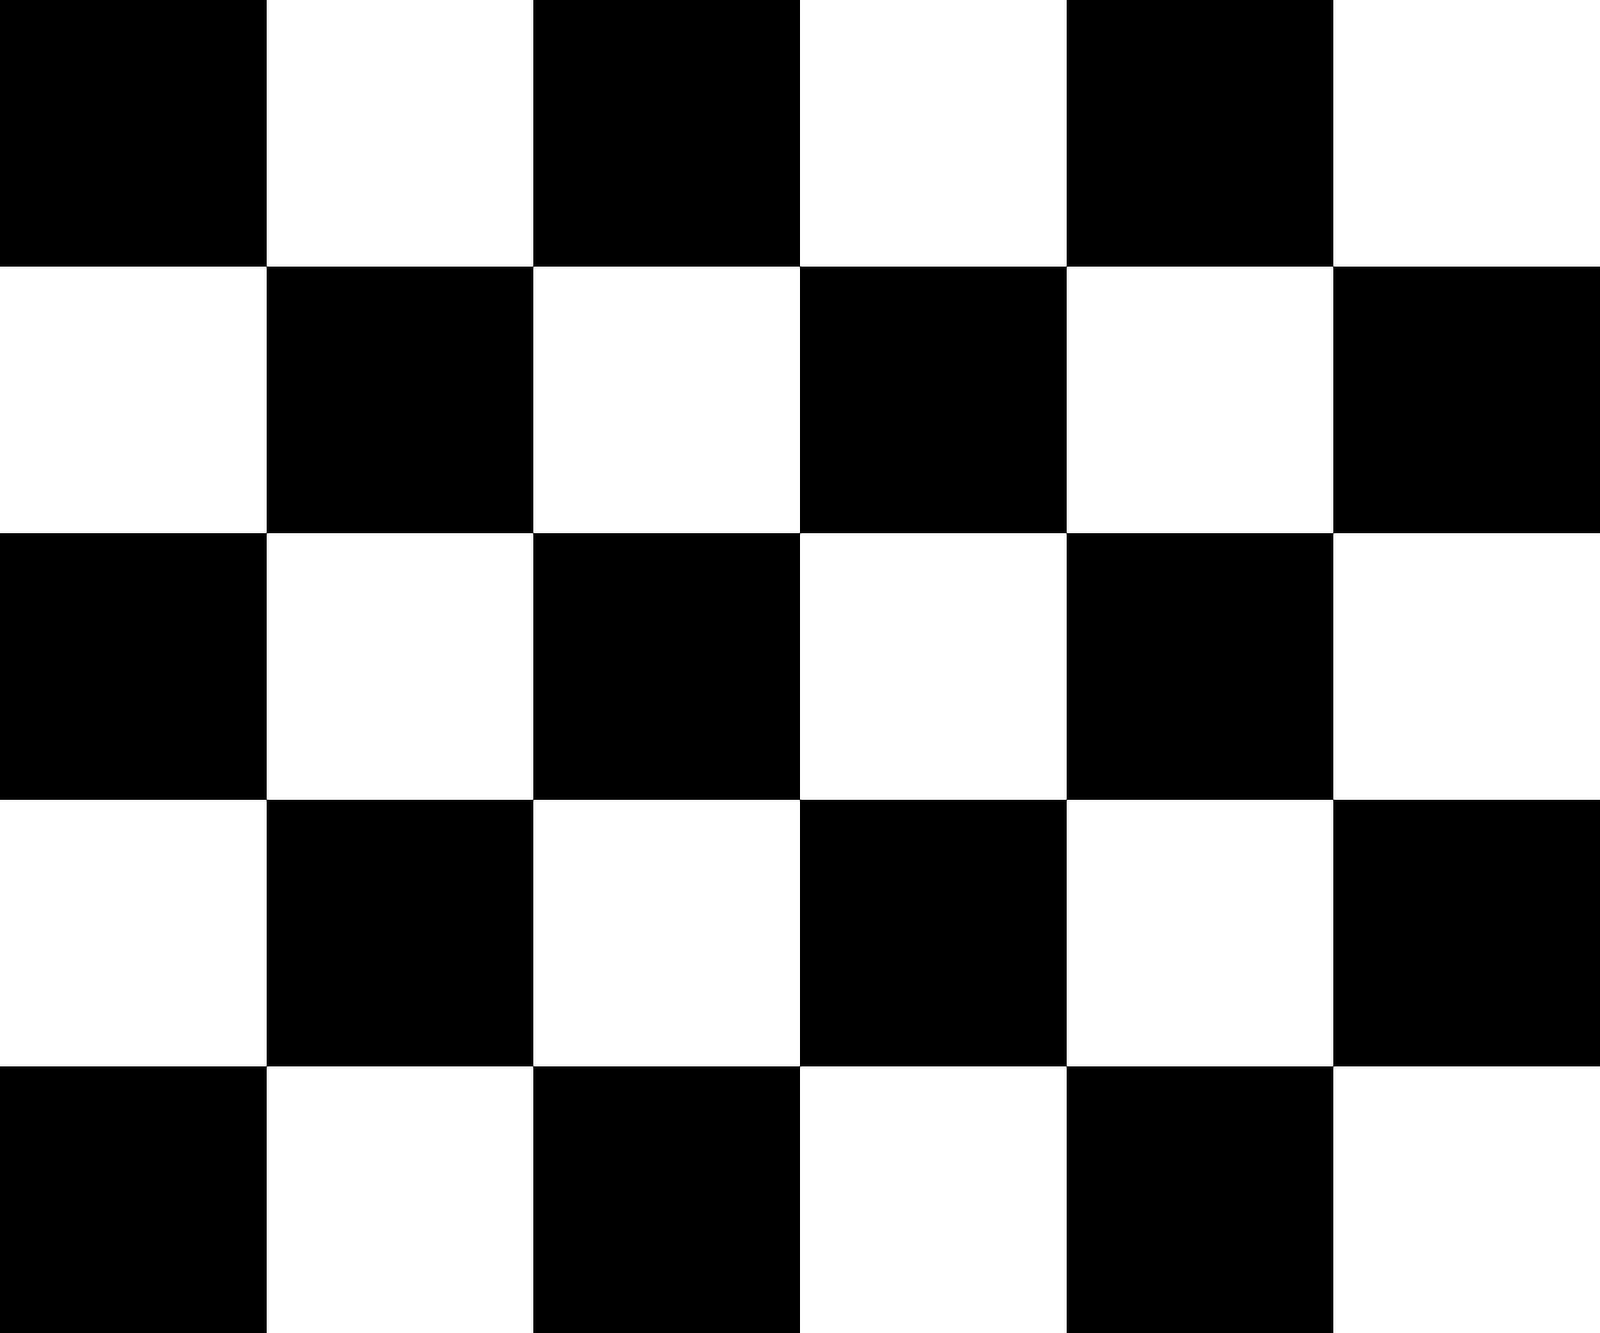 Black And White Checkered Wallpapers Top Free Black And White Checkered Backgrounds Wallpaperaccess My name is harry and i am sure you will find something to your liking here. black and white checkered wallpapers